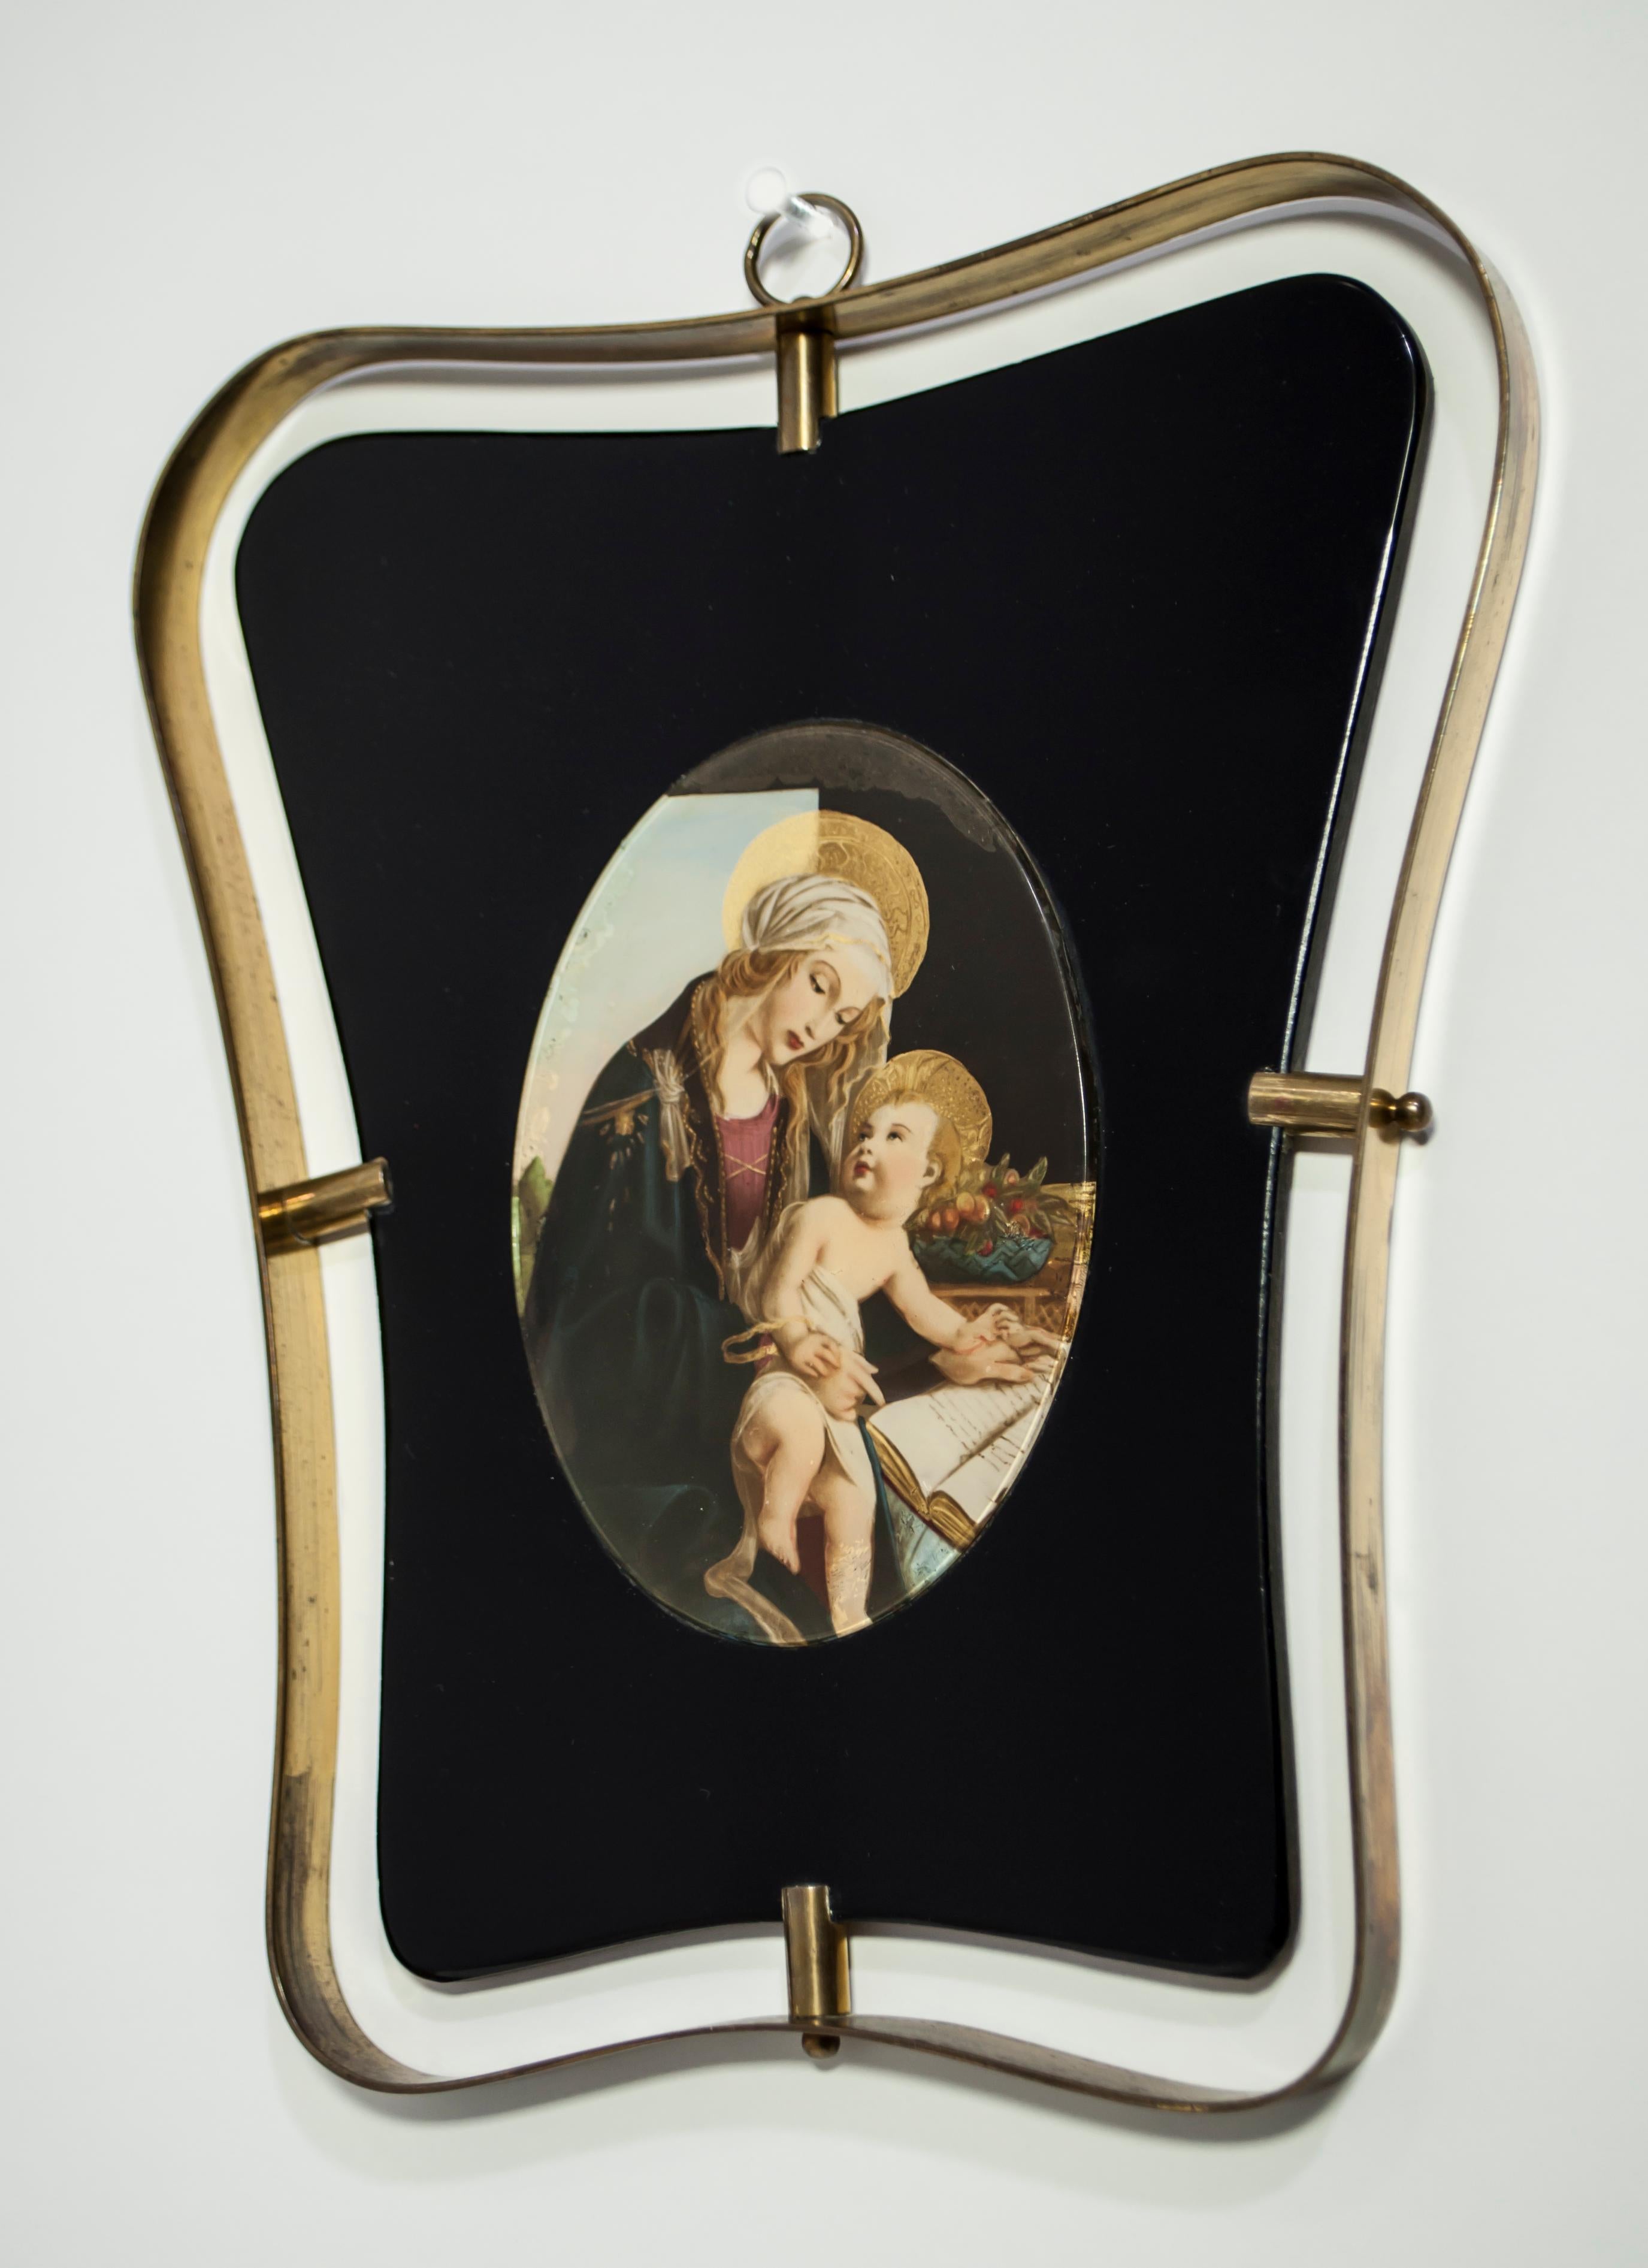 This madonna with child (Capoletto) was made on black crystal and brass frame, in the style of Gio Ponti. Italy, circa 1945s
It is a decal on glass decorated by hand.